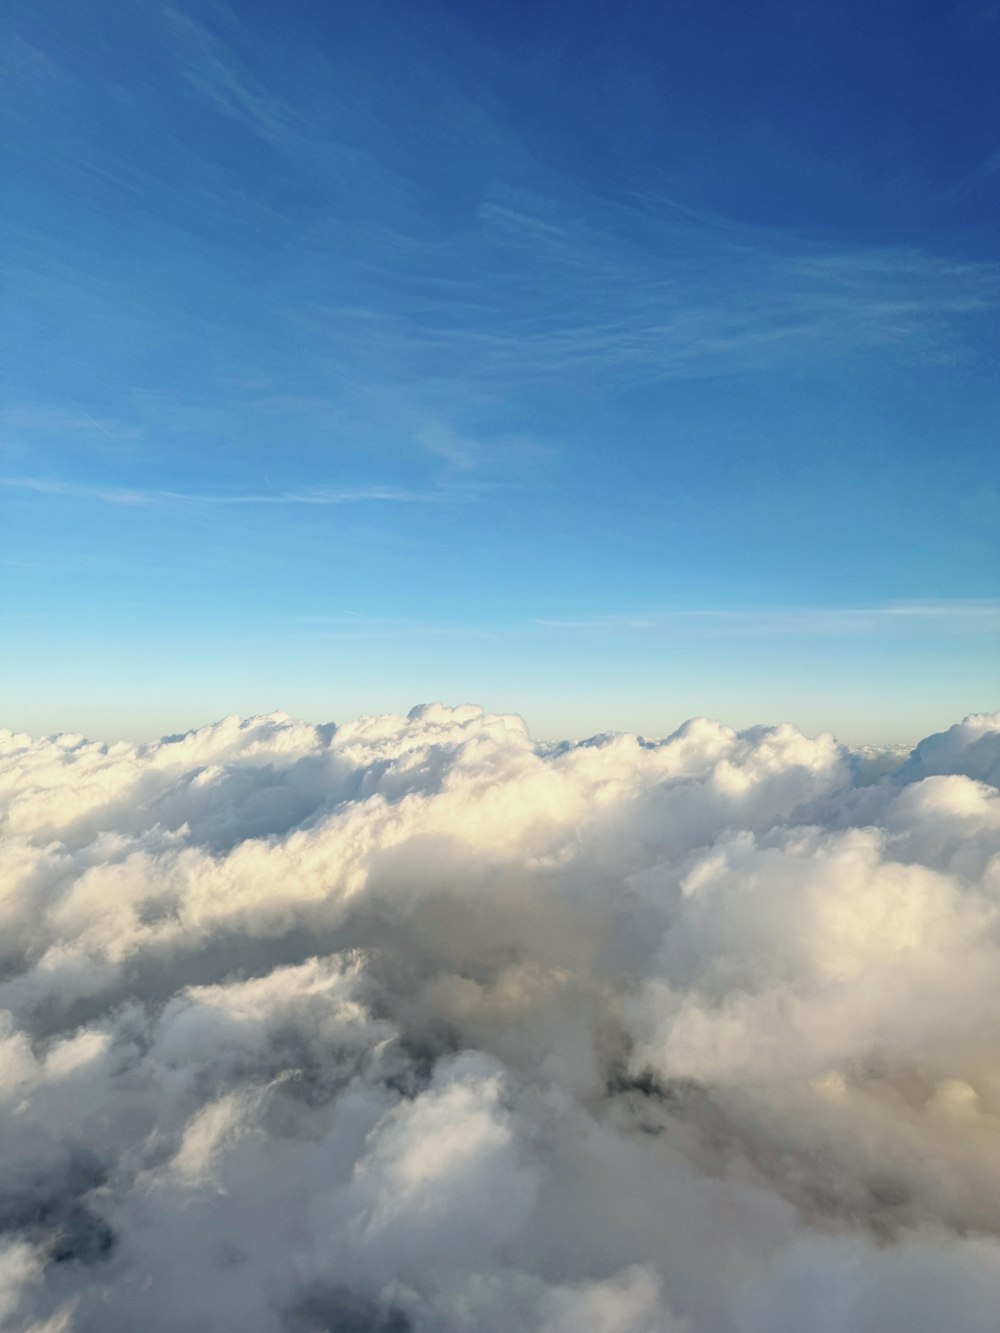 a view of the clouds from an airplane